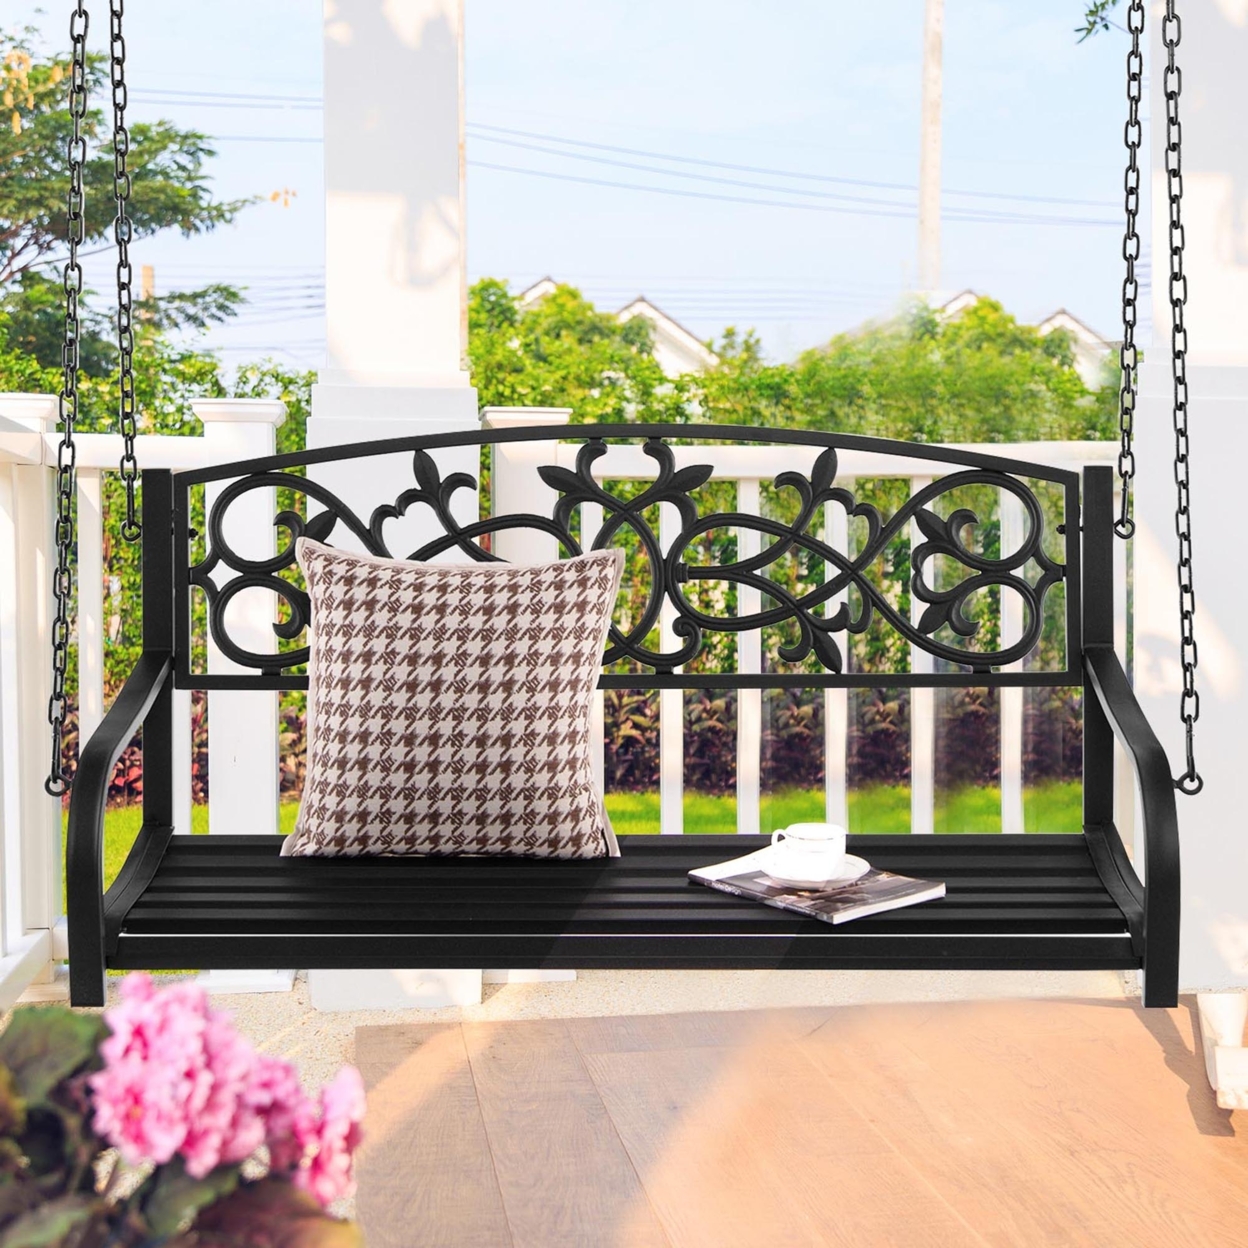 Patio Hanging Porch Swing 2-Person Outdoor Metal Swing Bench Chair W/ Chains - Black